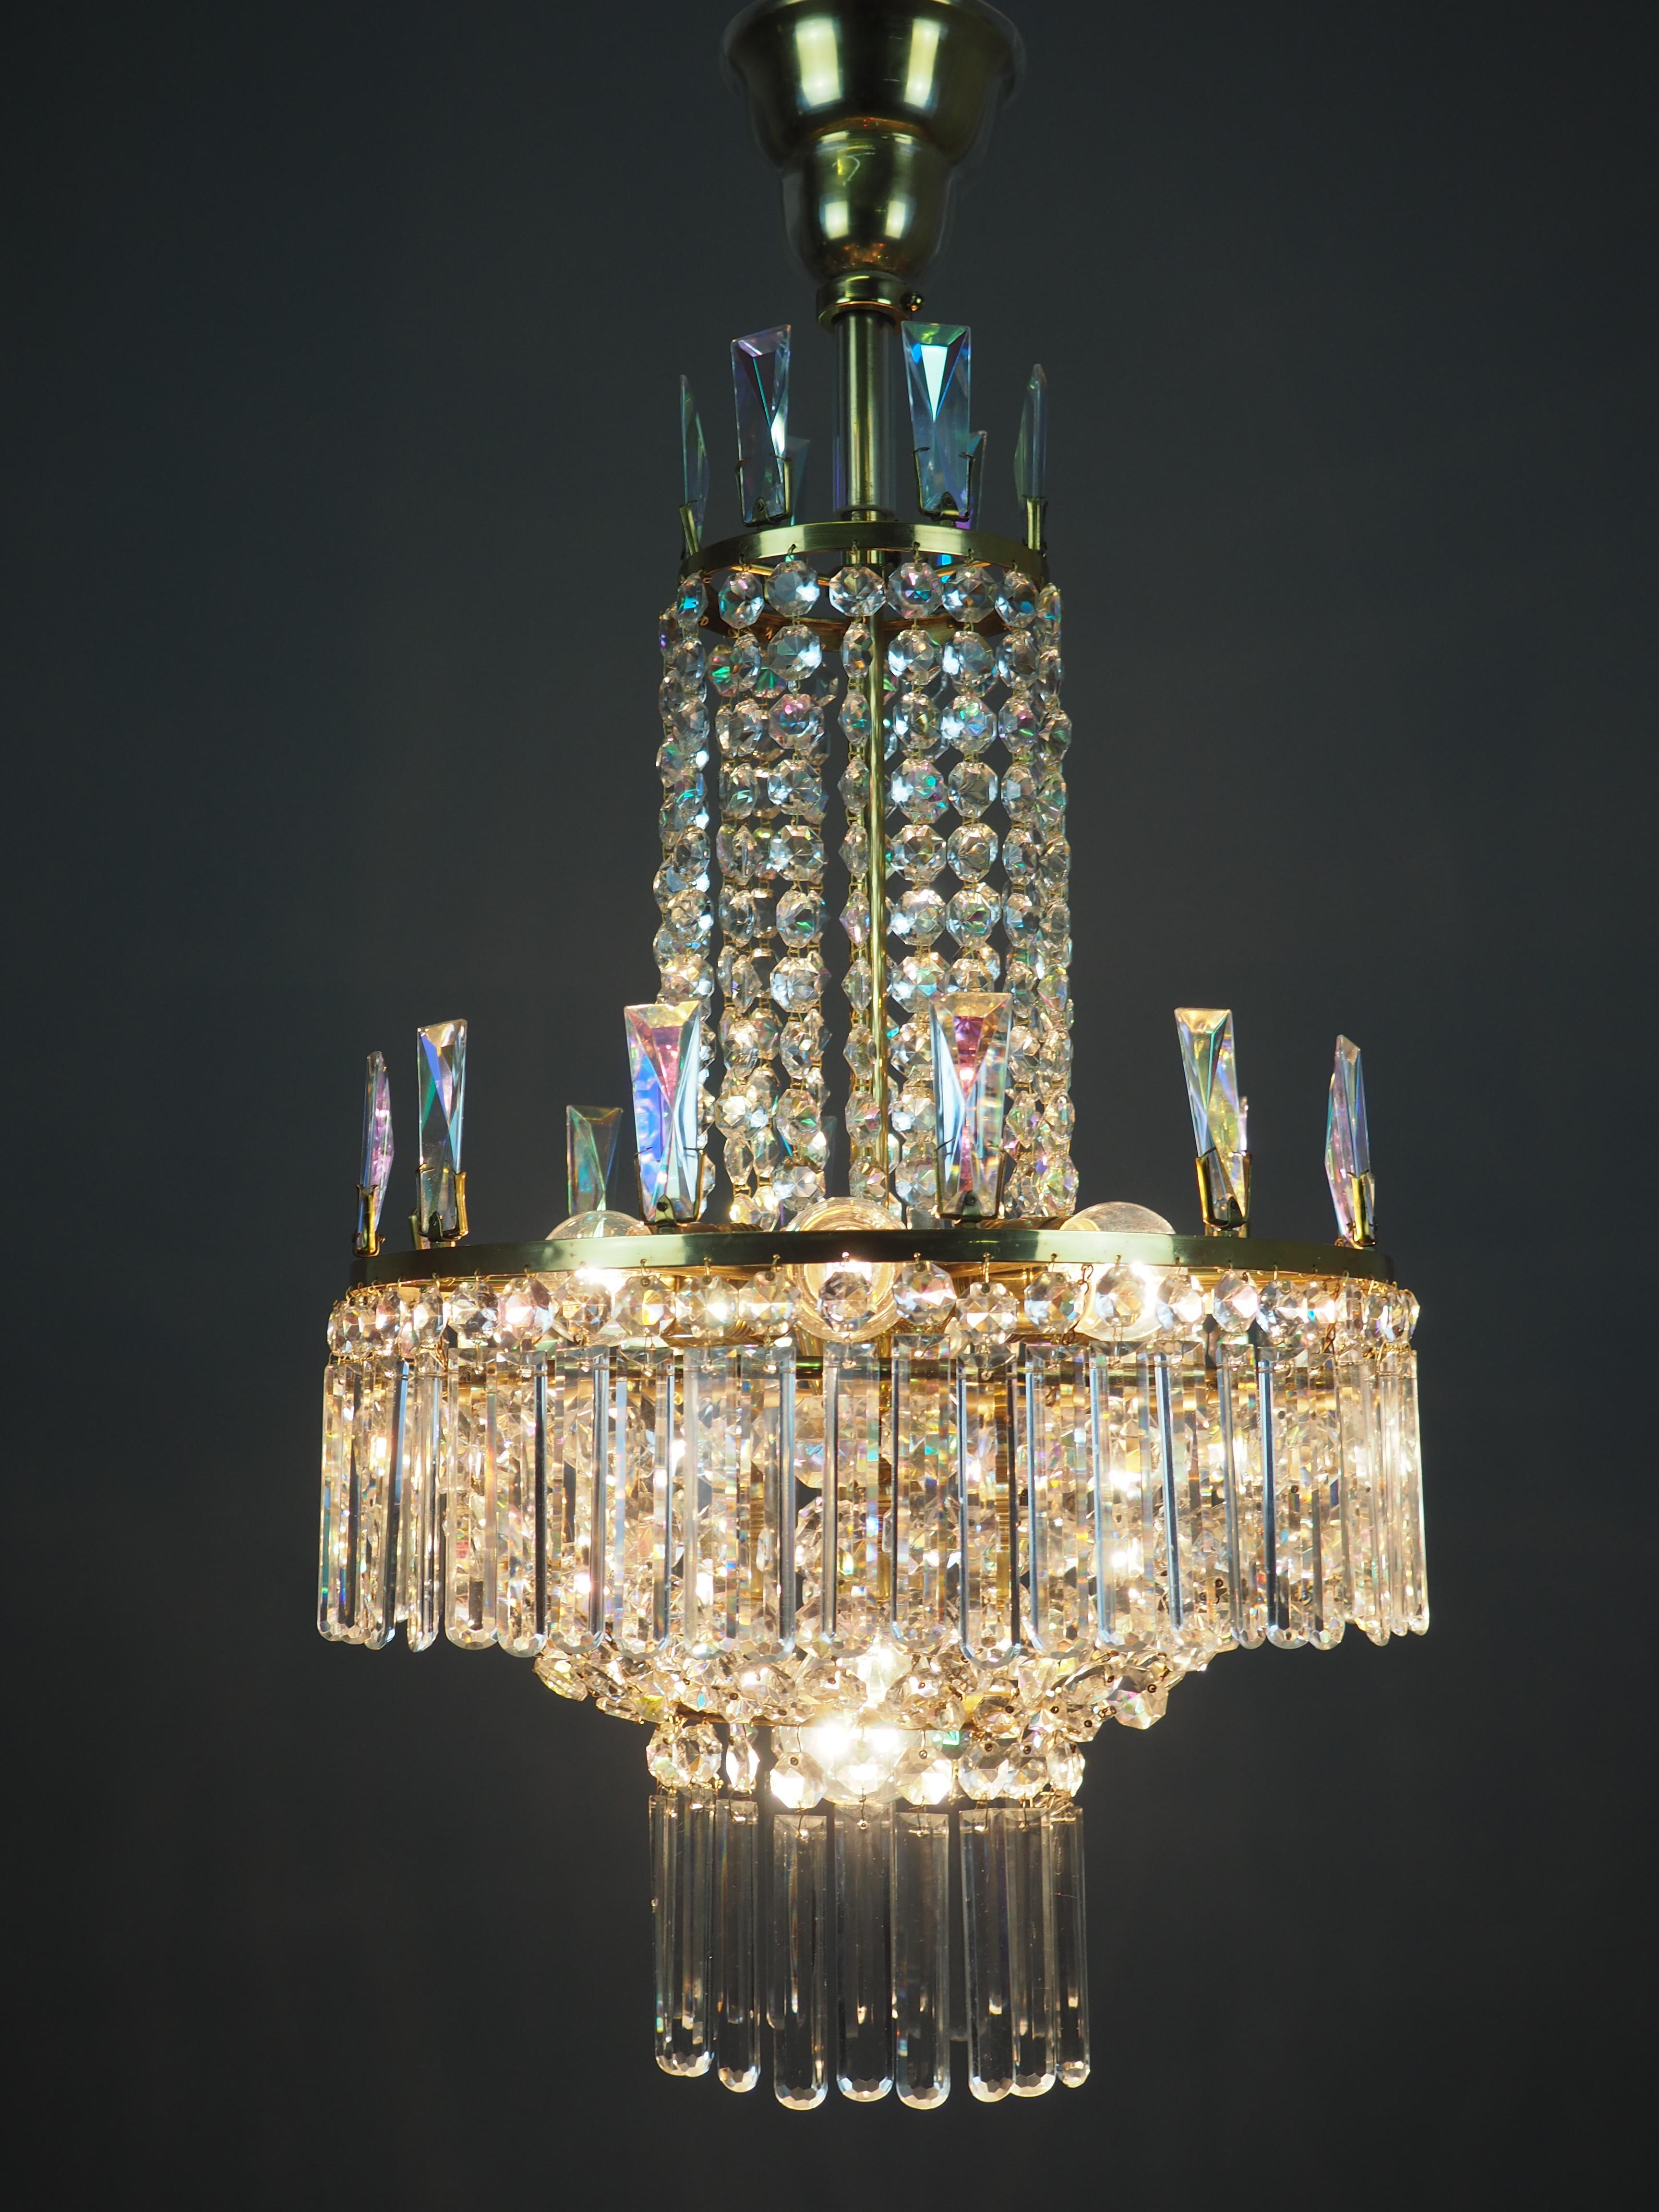 Wonderful, fine and fliligree seven-light glass and brass chandelier designed attr. to Lobmeyr, circa 1950s, Vienna, Austria.
The chandelier needs 7 x e27 standard screw bulbs for illuminate.
Pair of matching wall sconces are also available.
Newly